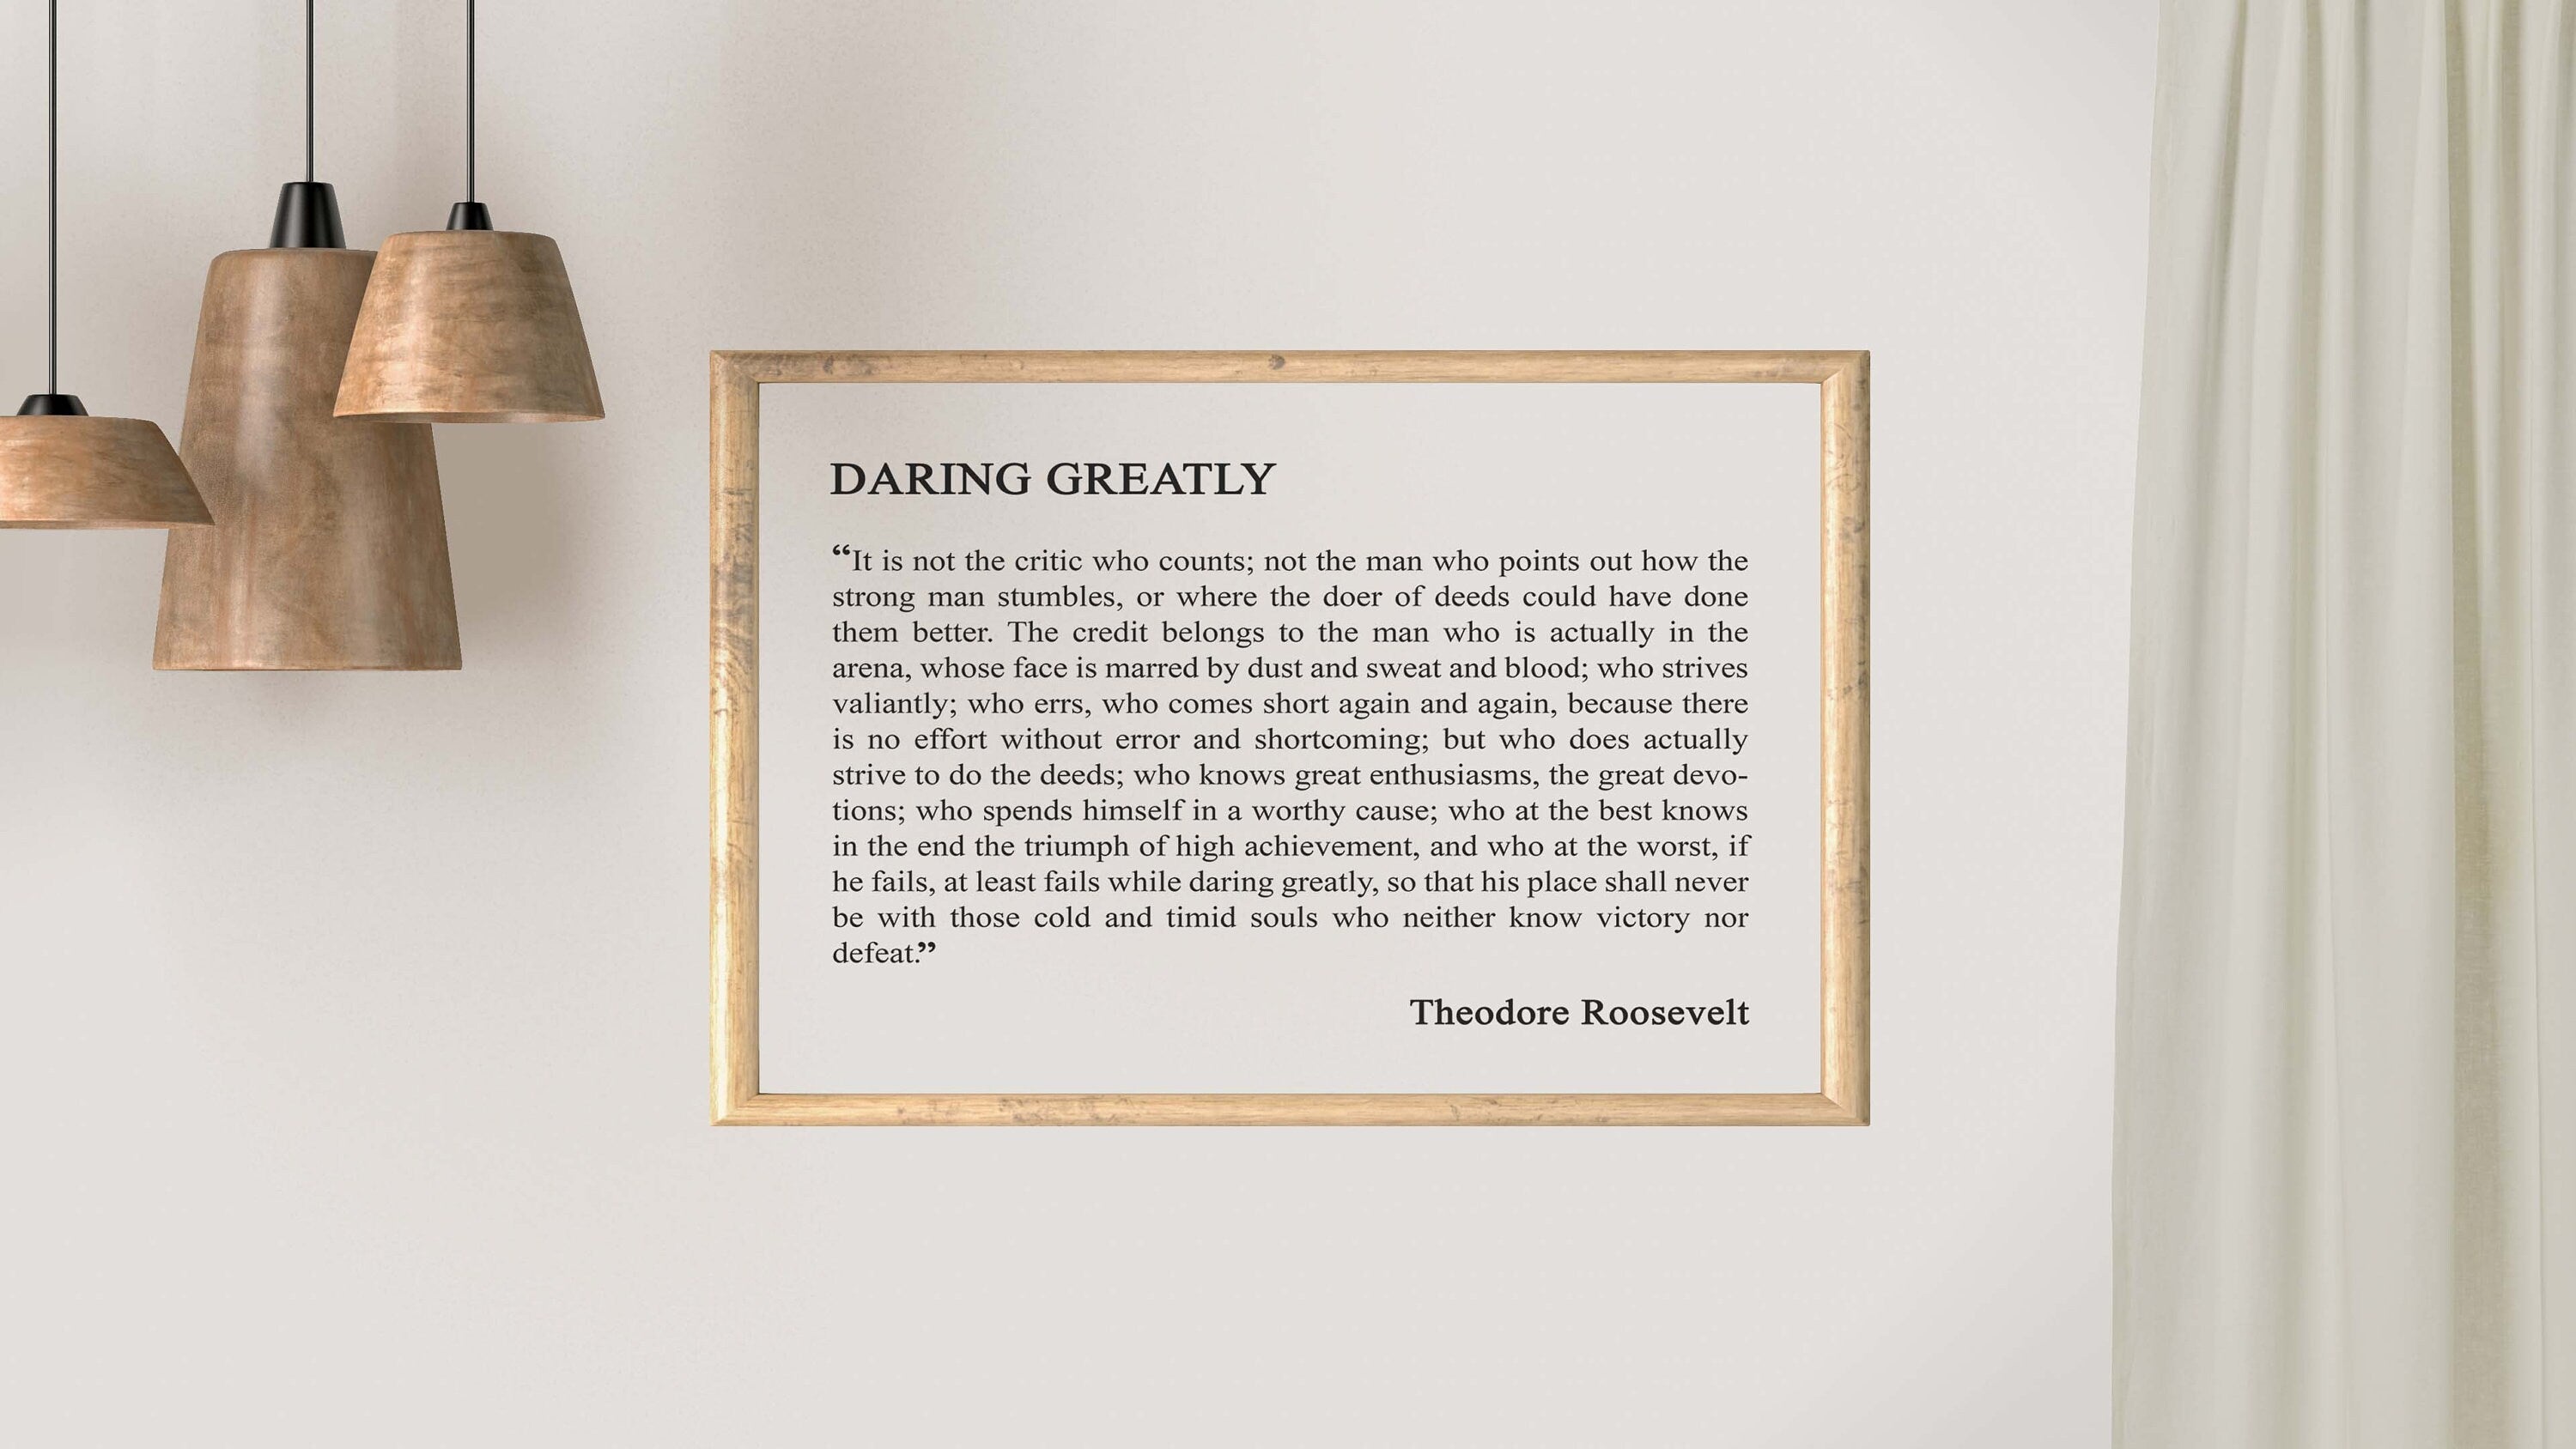 Daring Greatly Man in the Arena Theodore Roosevelt Office Wall Decor, Inspirational Quotes unframed Wall Art in Black and White